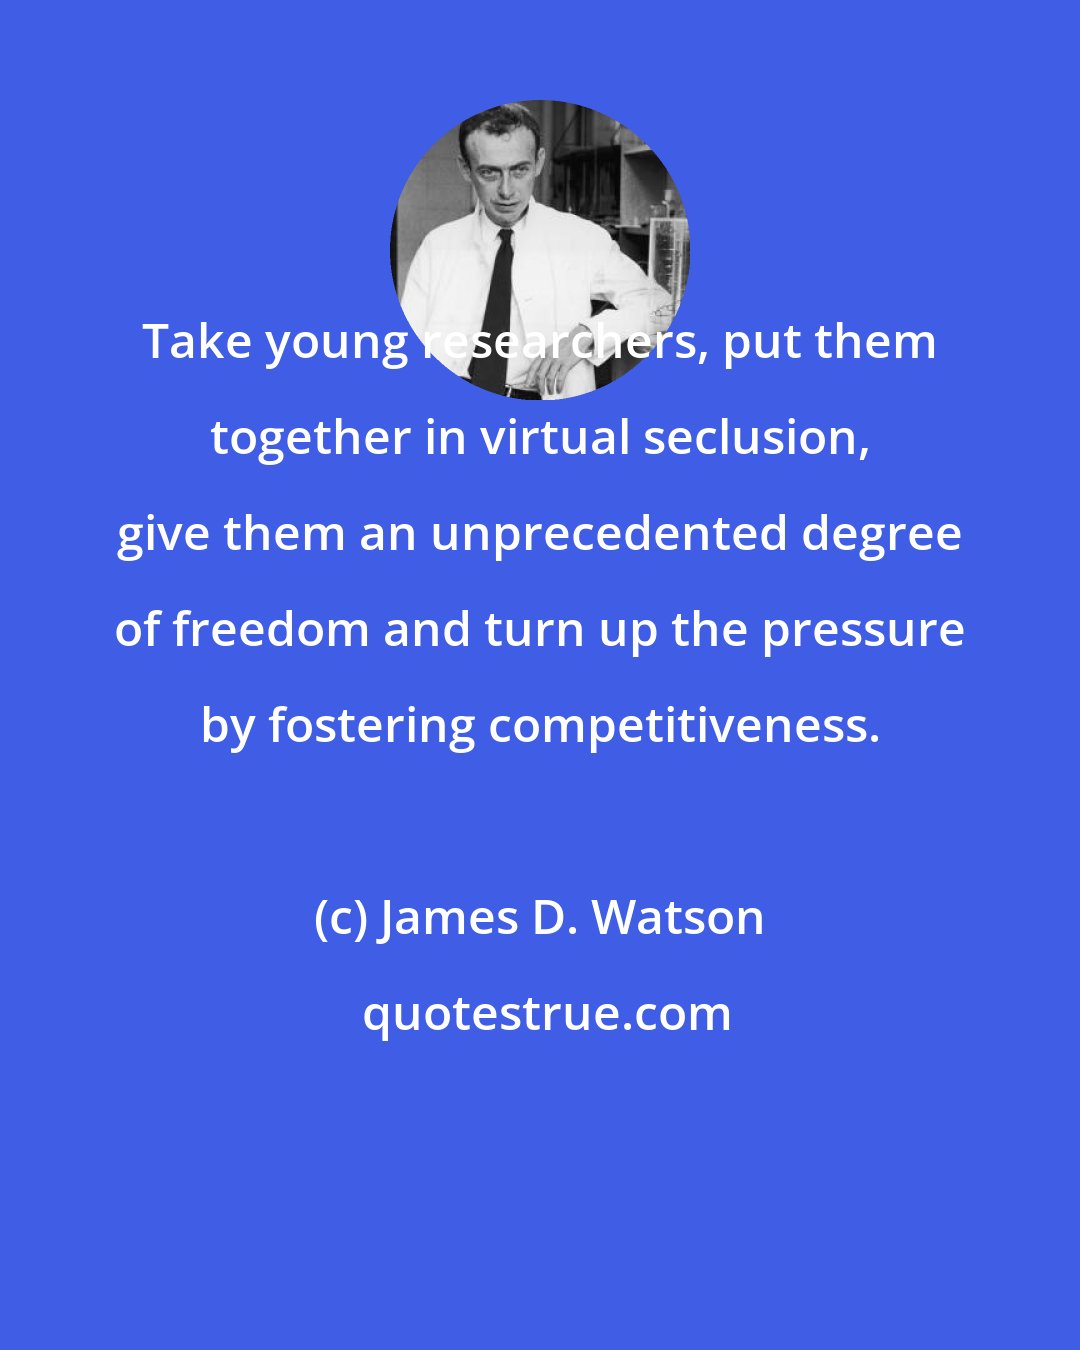 James D. Watson: Take young researchers, put them together in virtual seclusion, give them an unprecedented degree of freedom and turn up the pressure by fostering competitiveness.